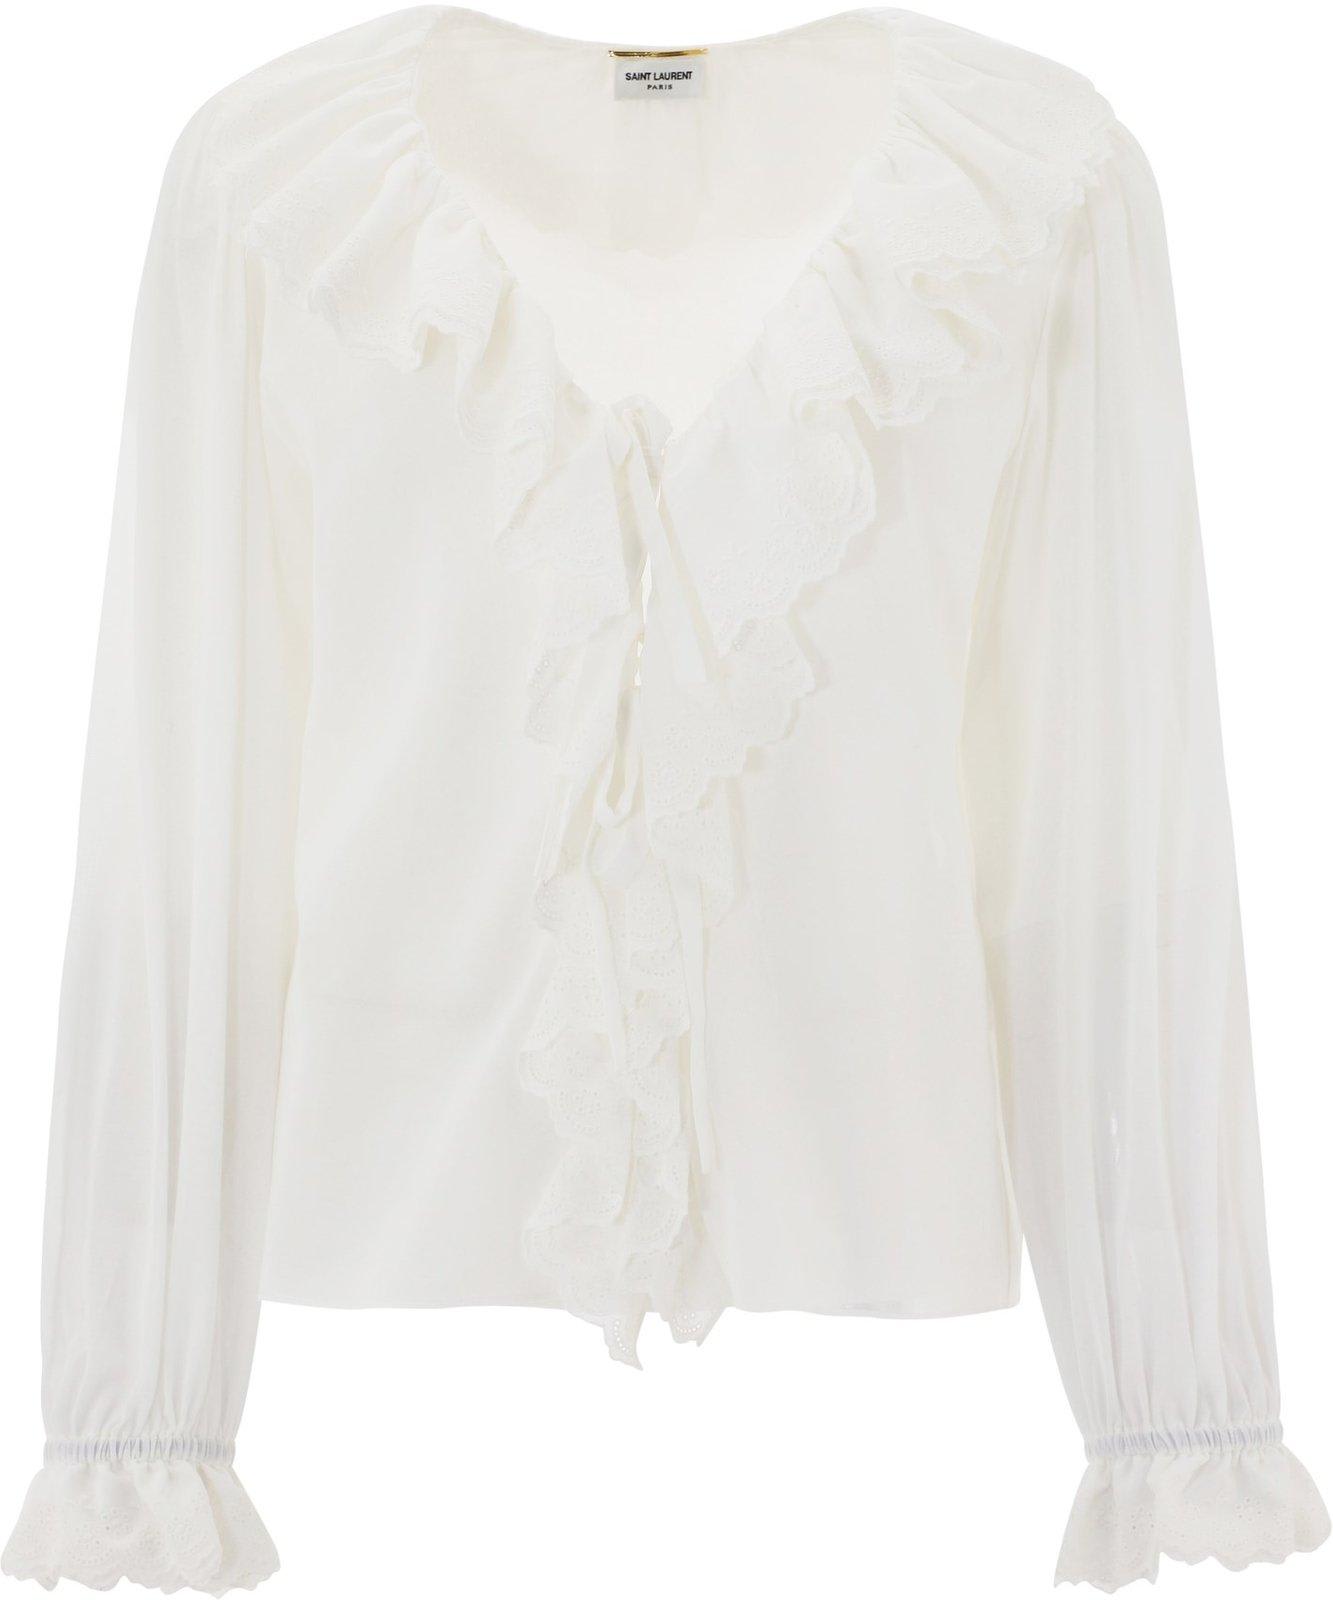 Broderie Anglaise Frilled Tie Blouse